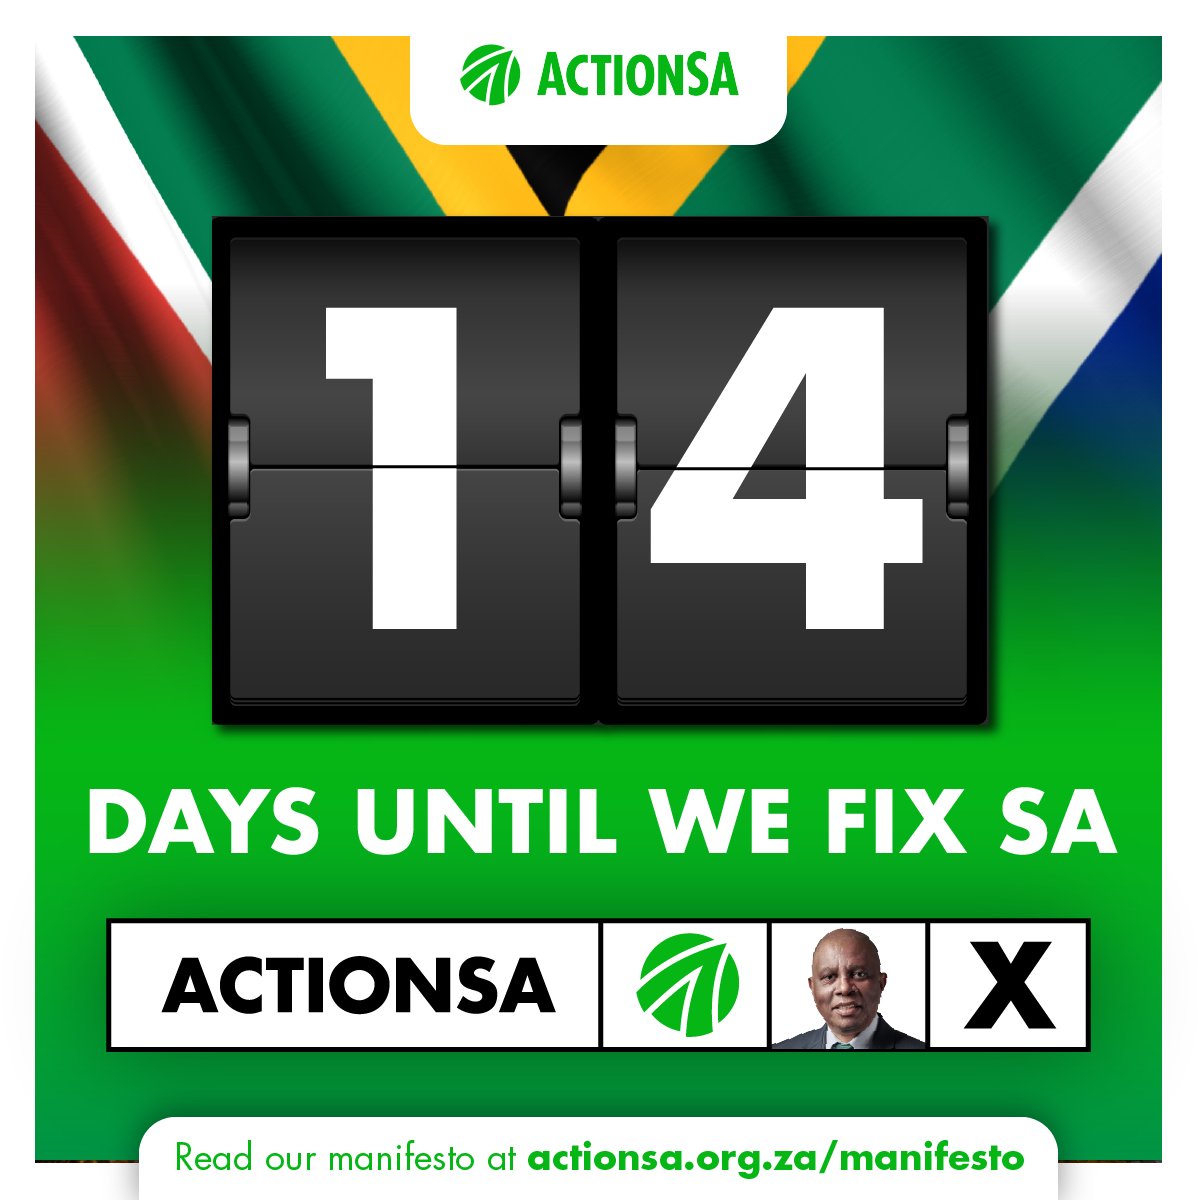 1️⃣4️⃣ 𝗱𝗮𝘆𝘀 𝘁𝗼 𝗴𝗼! In just two weeks - on Wednesday, 29 May - we head to the polls. Get ready to cast your vote and make your voice heard!   #VoteActionSA 🗳️